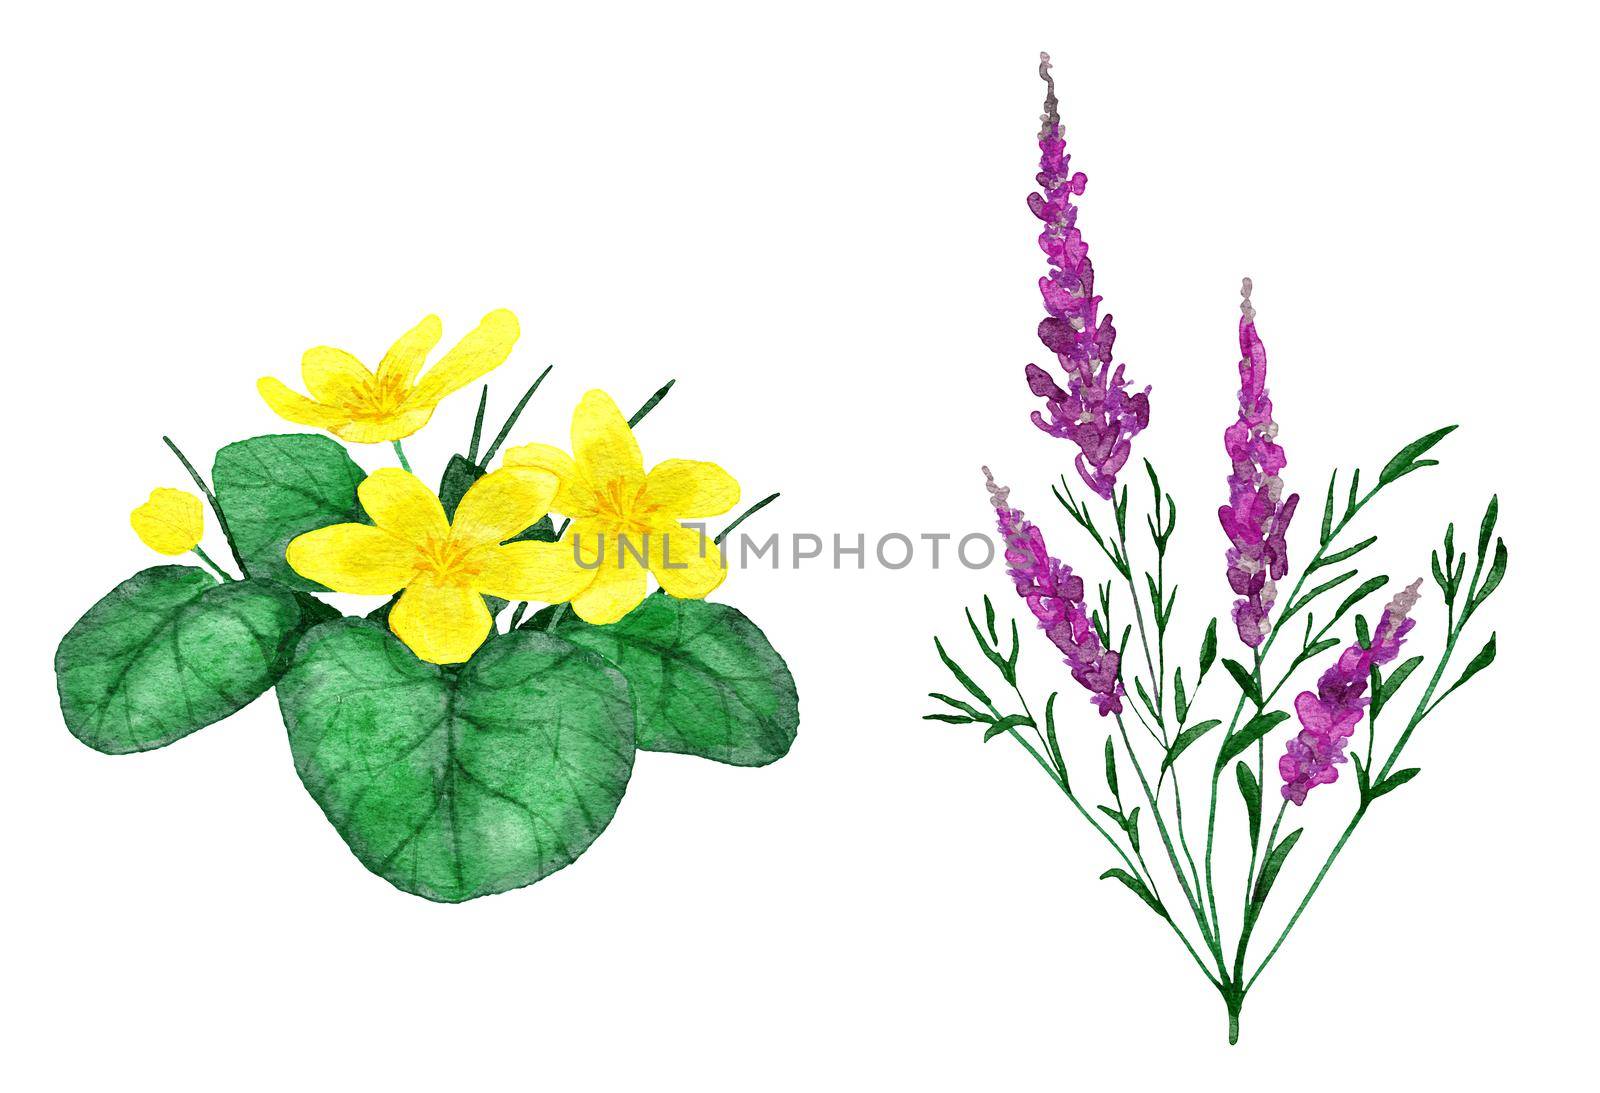 Watercolor hand drawn illustration of purple pink willowherb chamaenerion and yellow trollius flowers. Floral natural wildflower river lake forest landscape. Organic bloom leaf leaves plants herbs